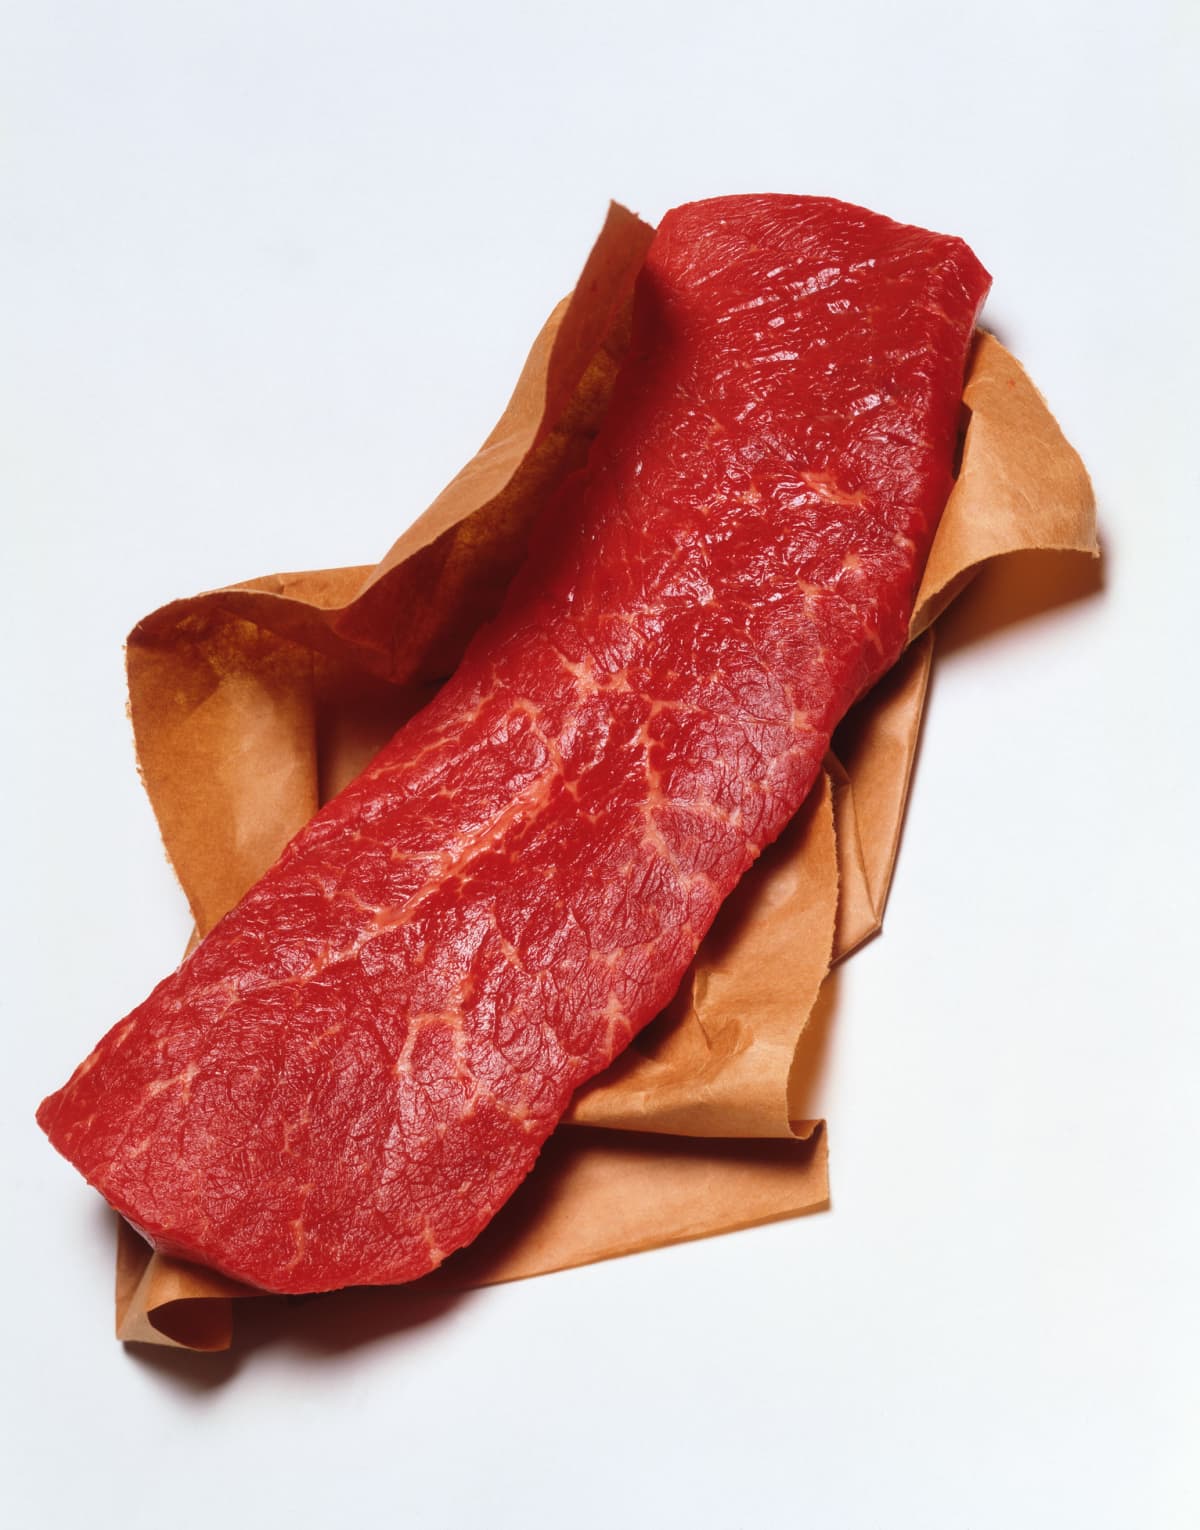 Raw skirt steak wrapped in brown paper